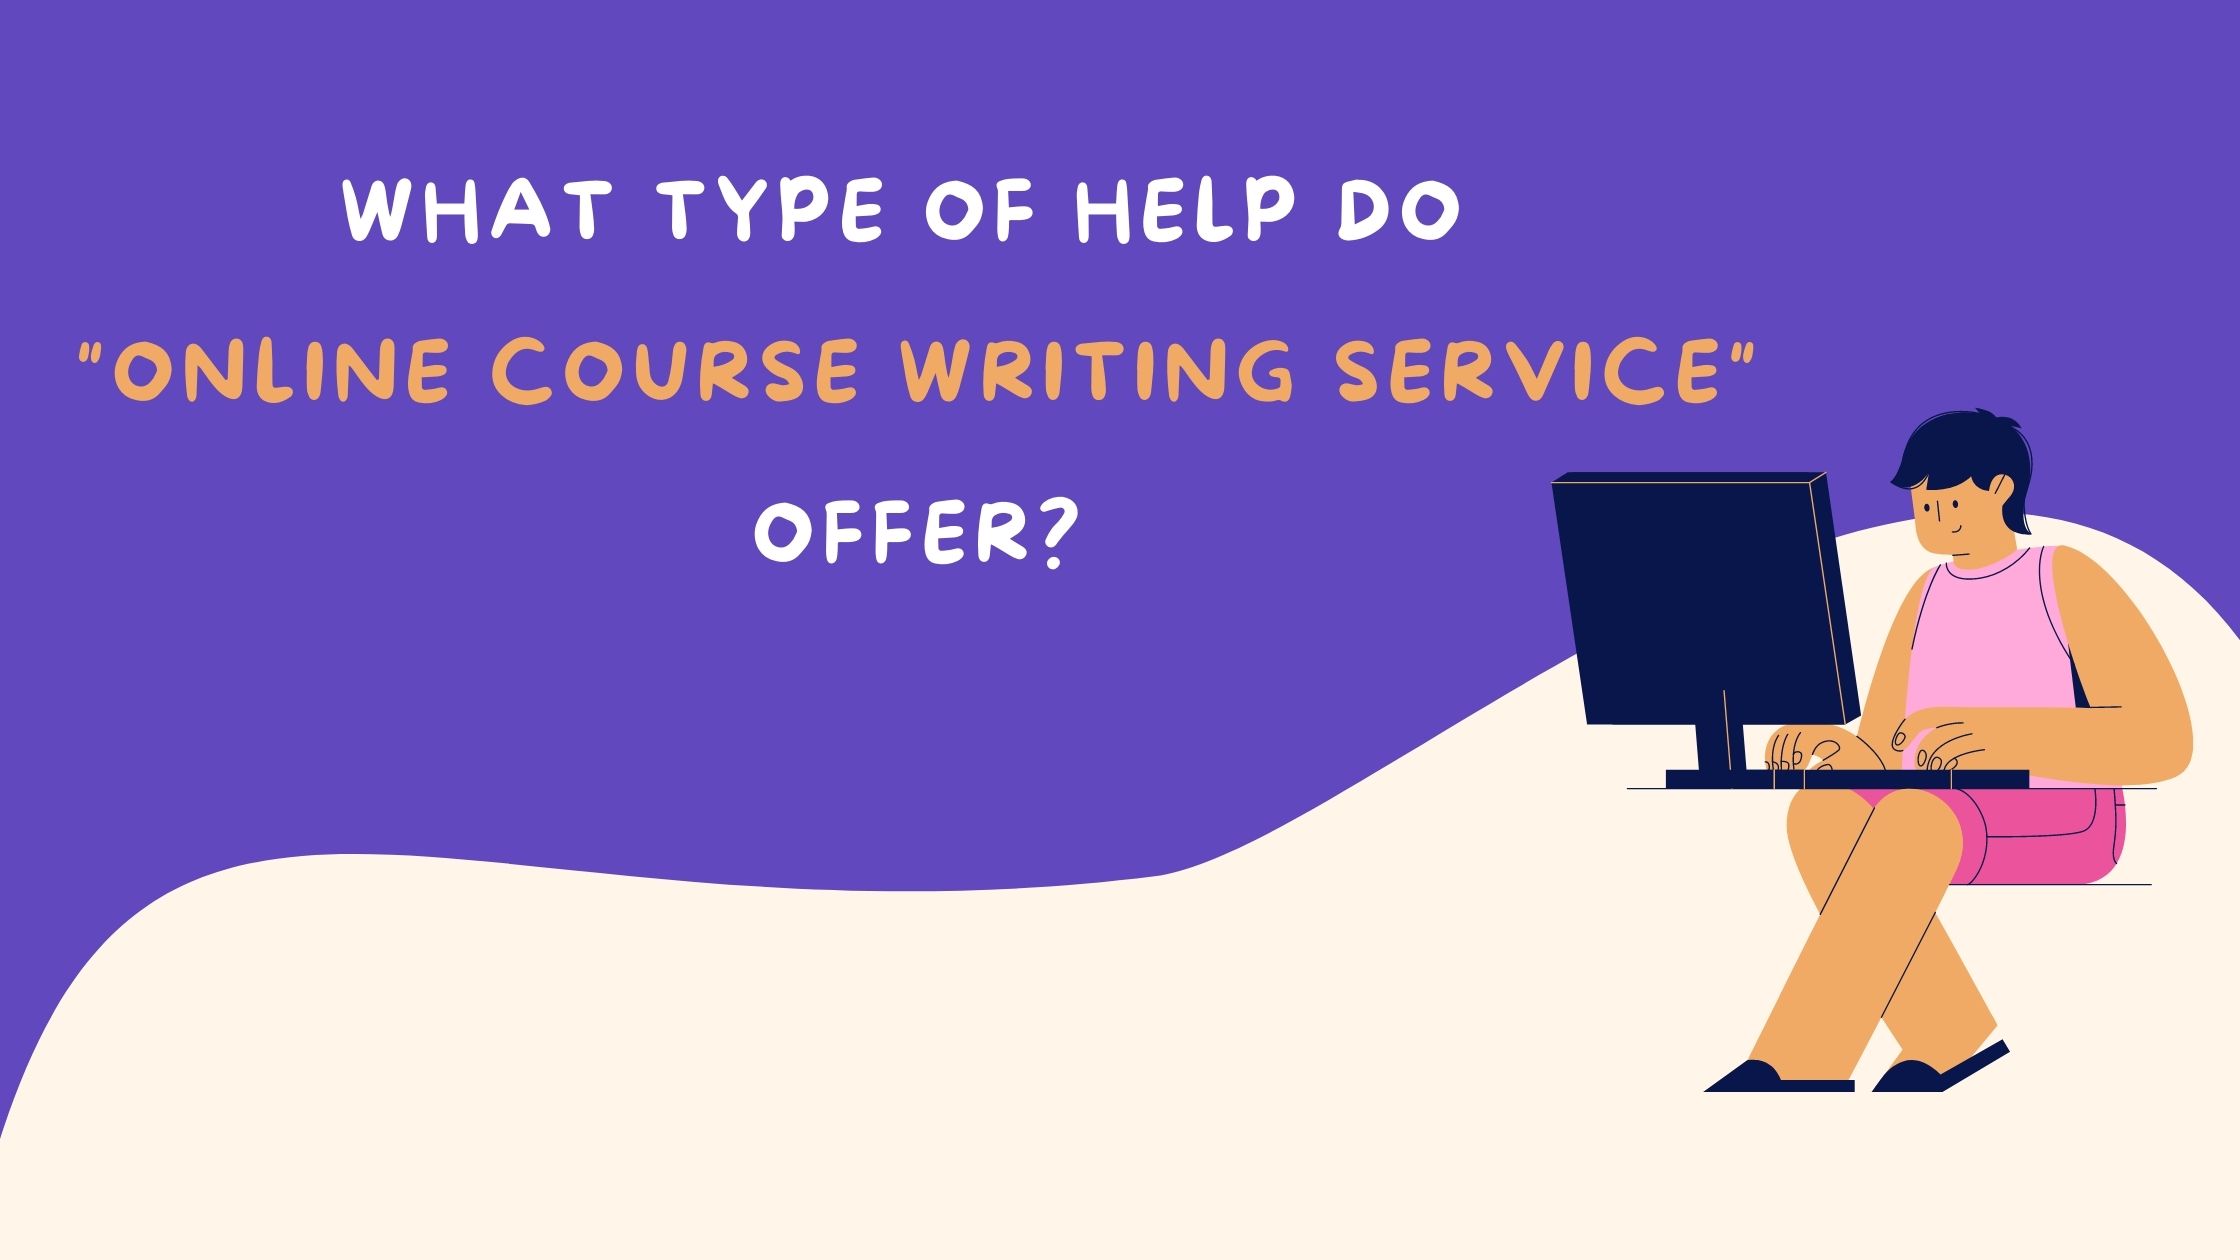 What type of help do “online course writing service” offer?